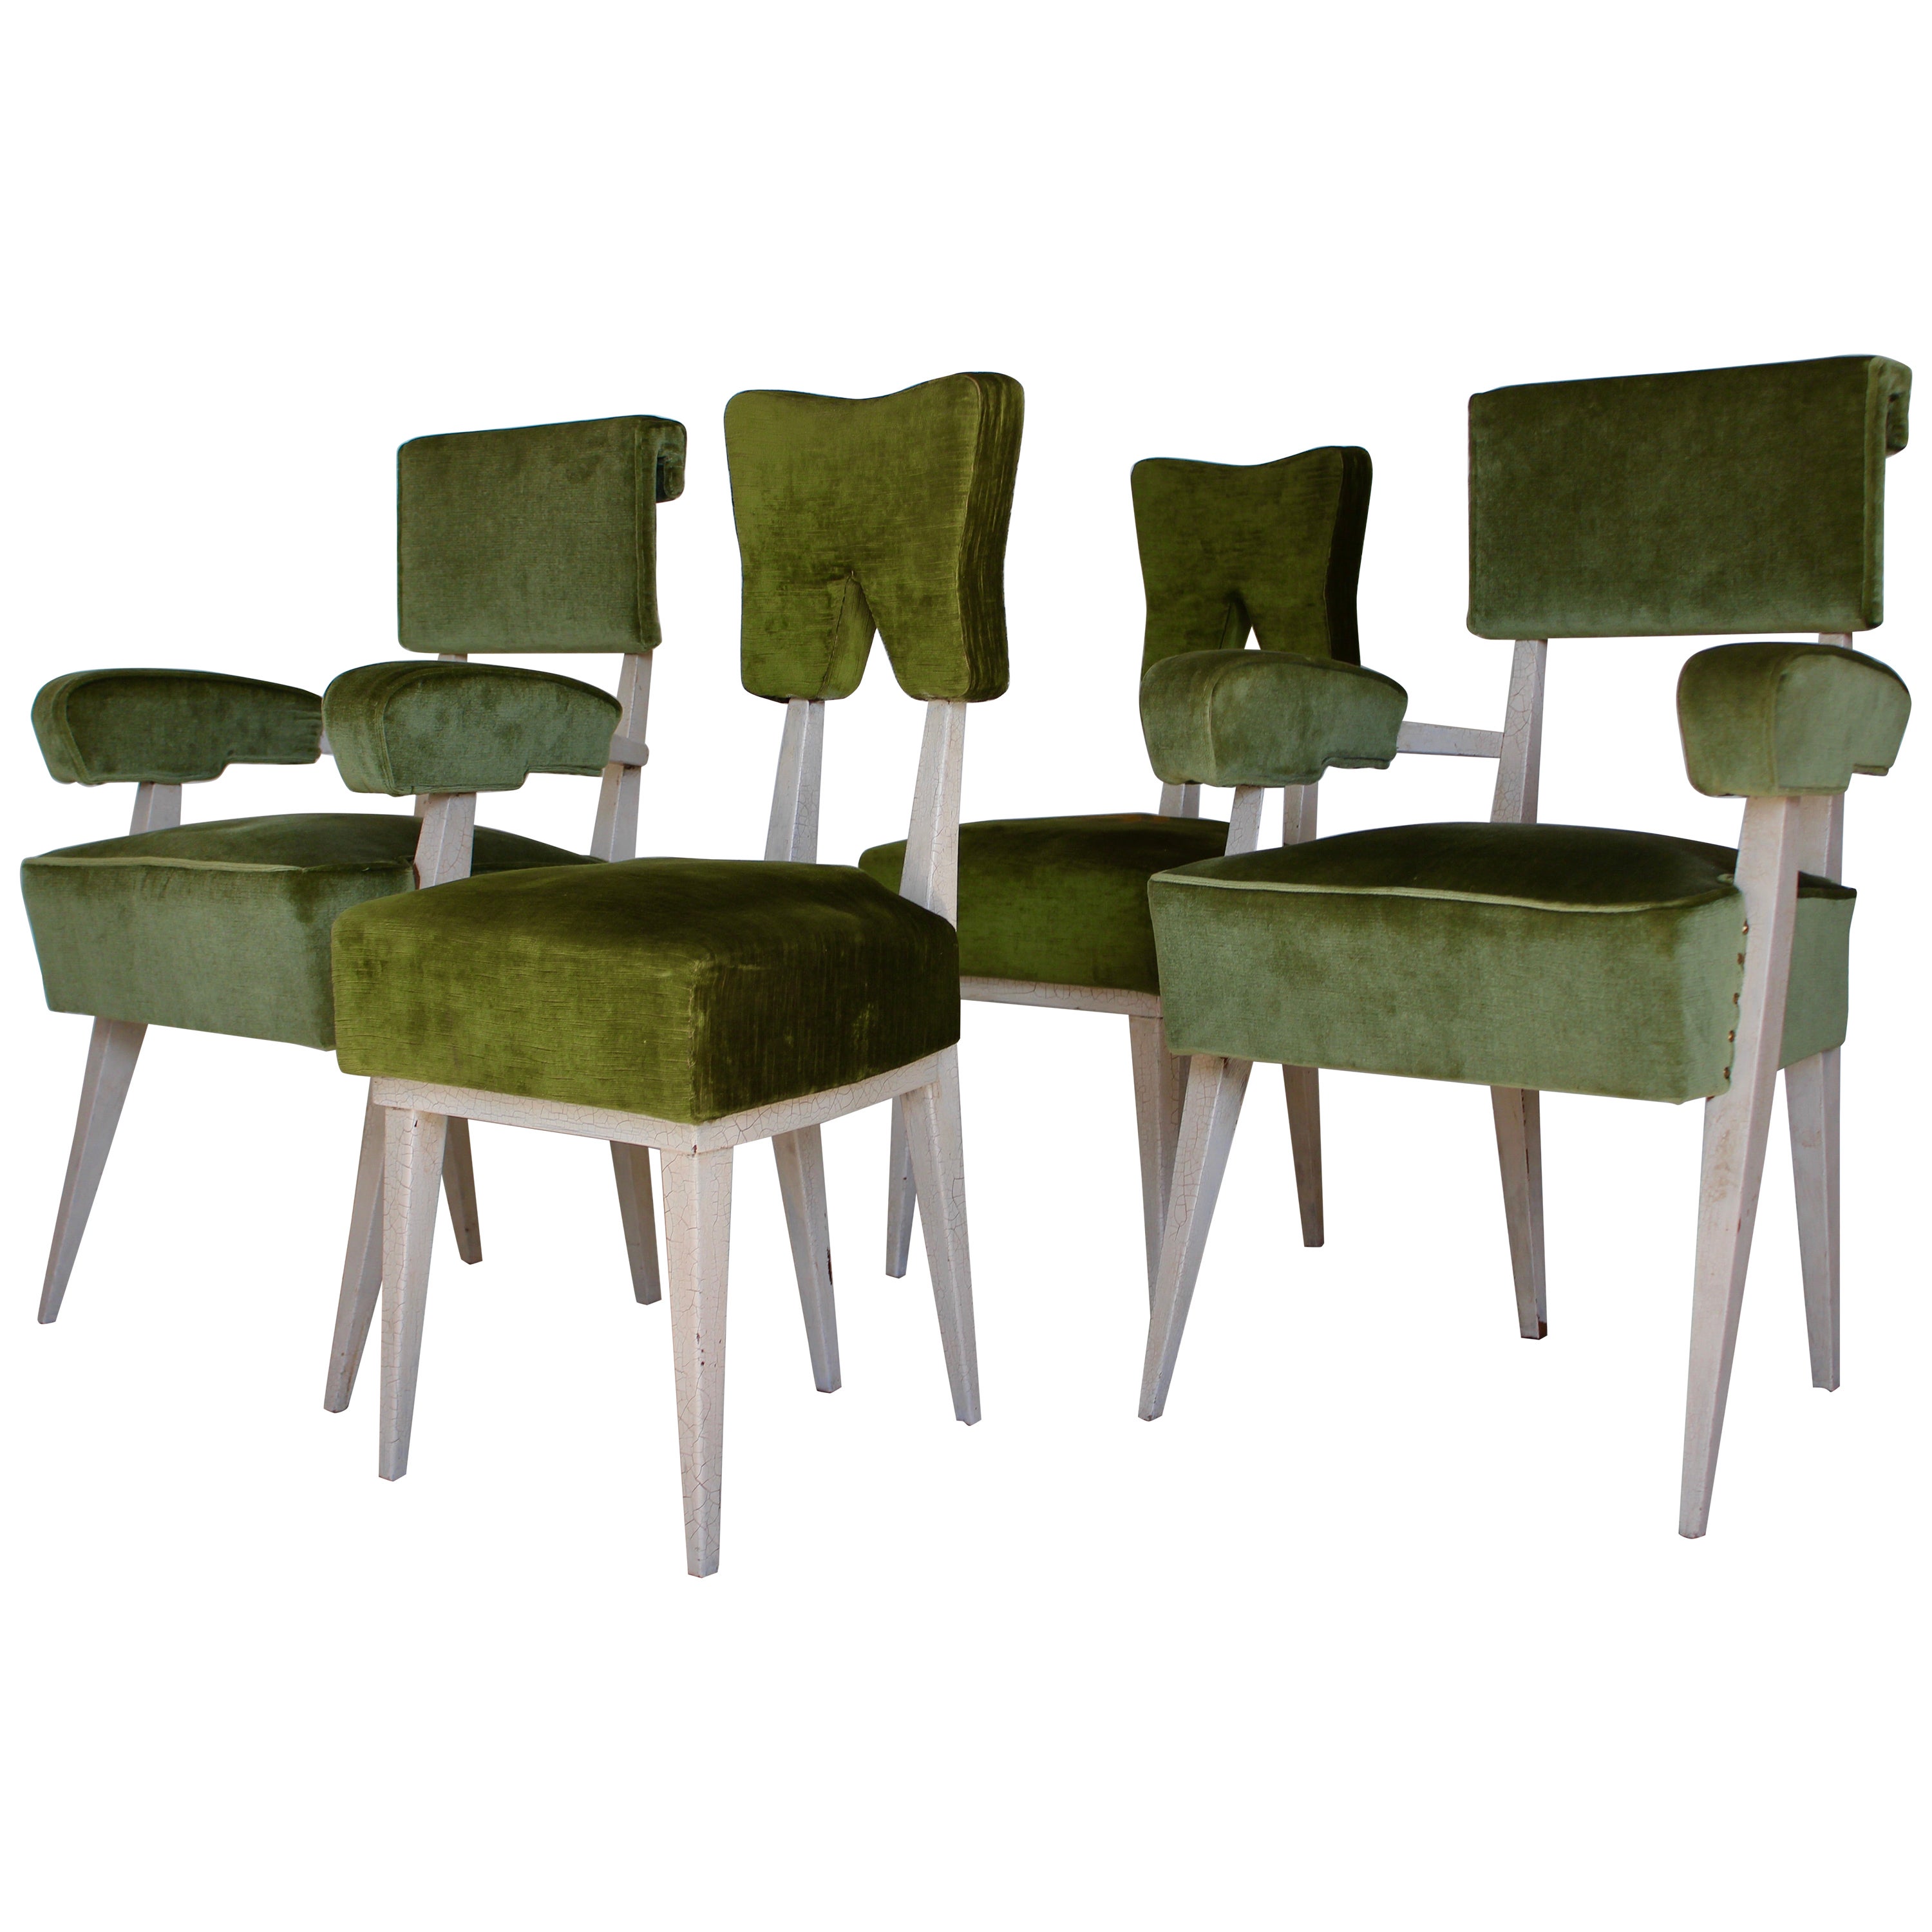 Mid-Century Modern Four Green Chairs Attribuited to Bbpr Studio, Italy, 1950s  For Sale